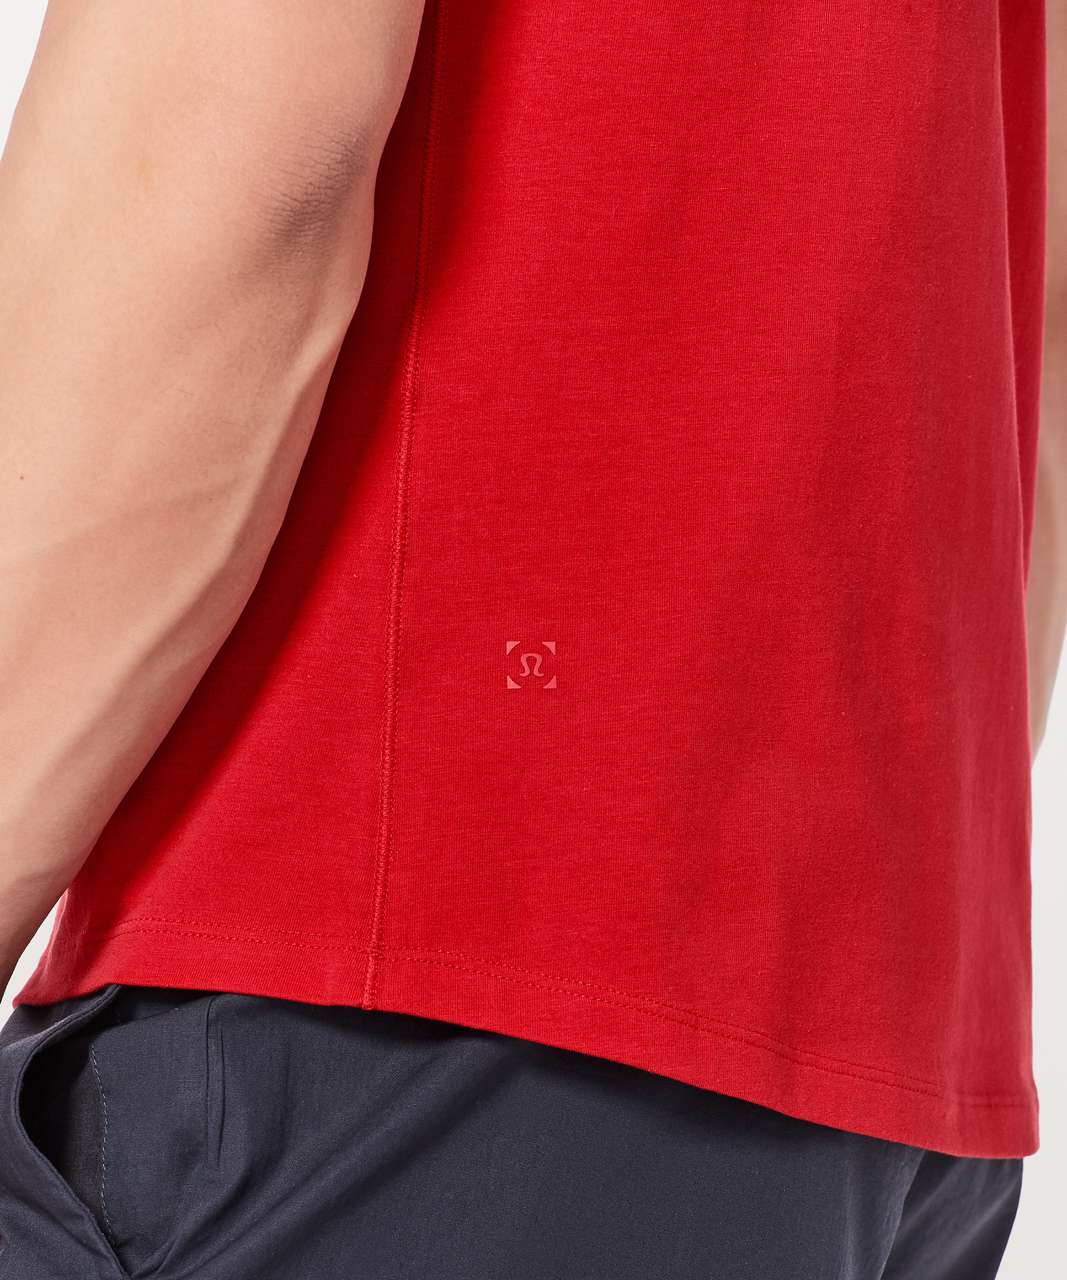 Lululemon 5 Year Basic Tee *Updated Fit - Bold Red